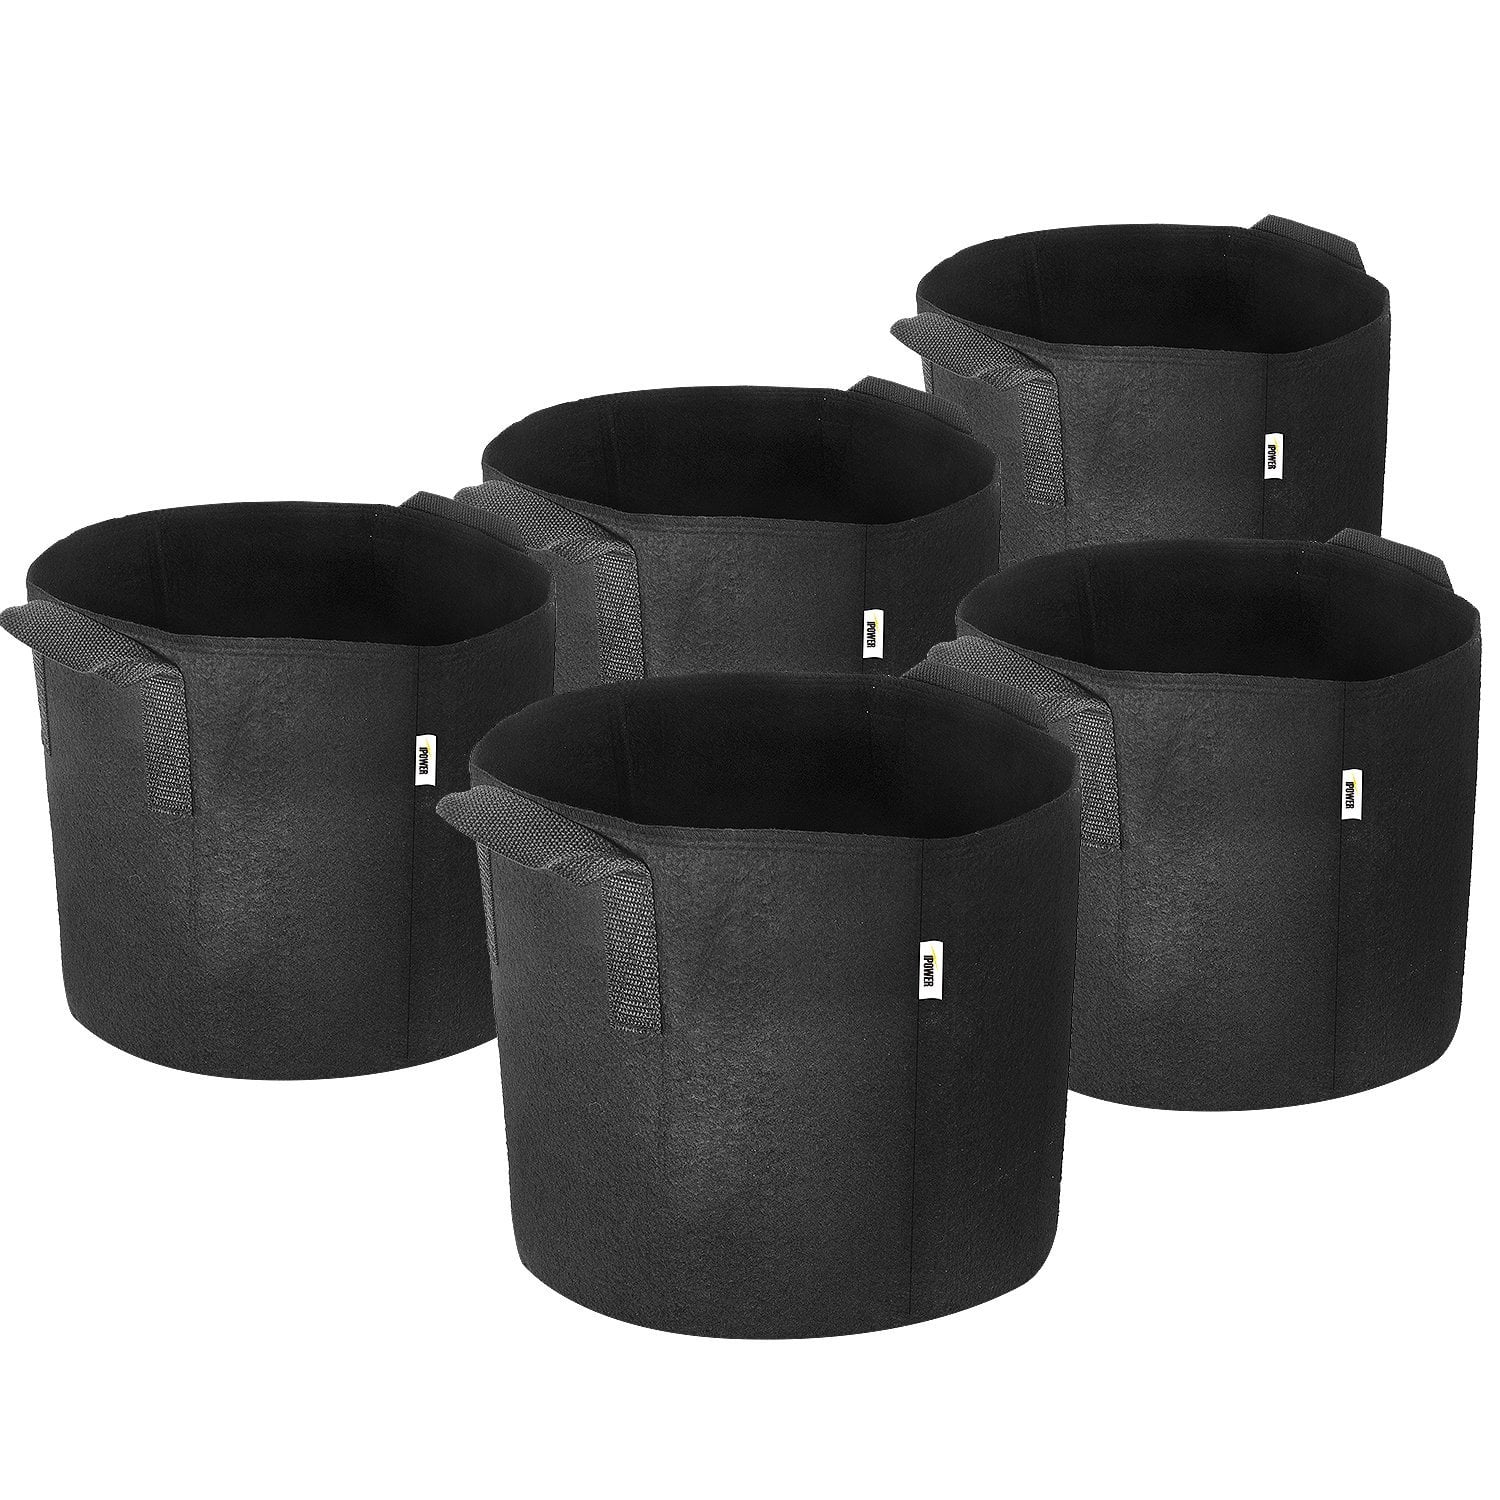 5 Pots Smart Pot 3 Gallon Black Fabric/Soft Sided Garden Aeration Container